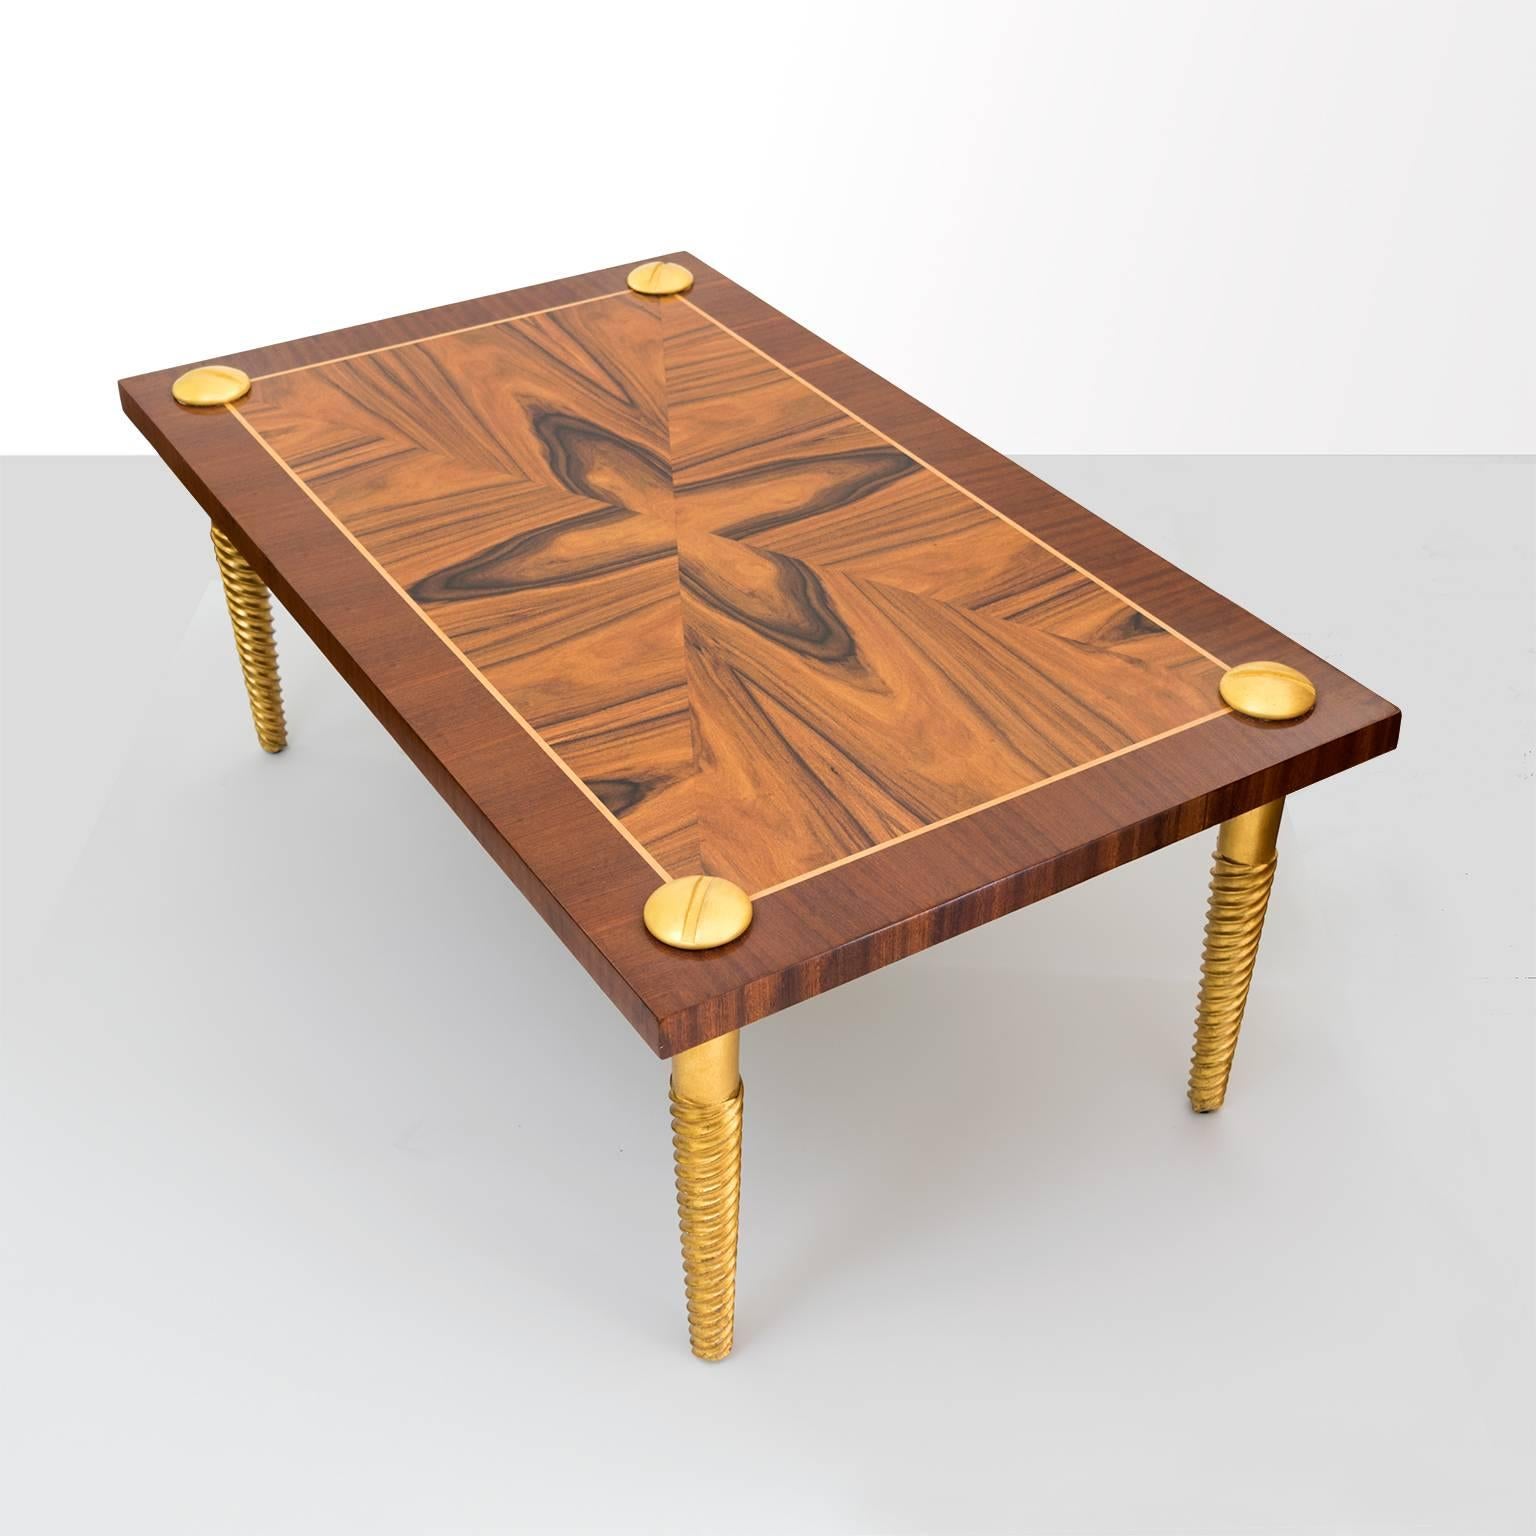 Midcentury Modern European walnut and mahogany marquetry coffee table. The legs are gilt carved wood in the form of screws with screw heads on the surface. Newly restored in excellent condition.

Measures: Length 47.25